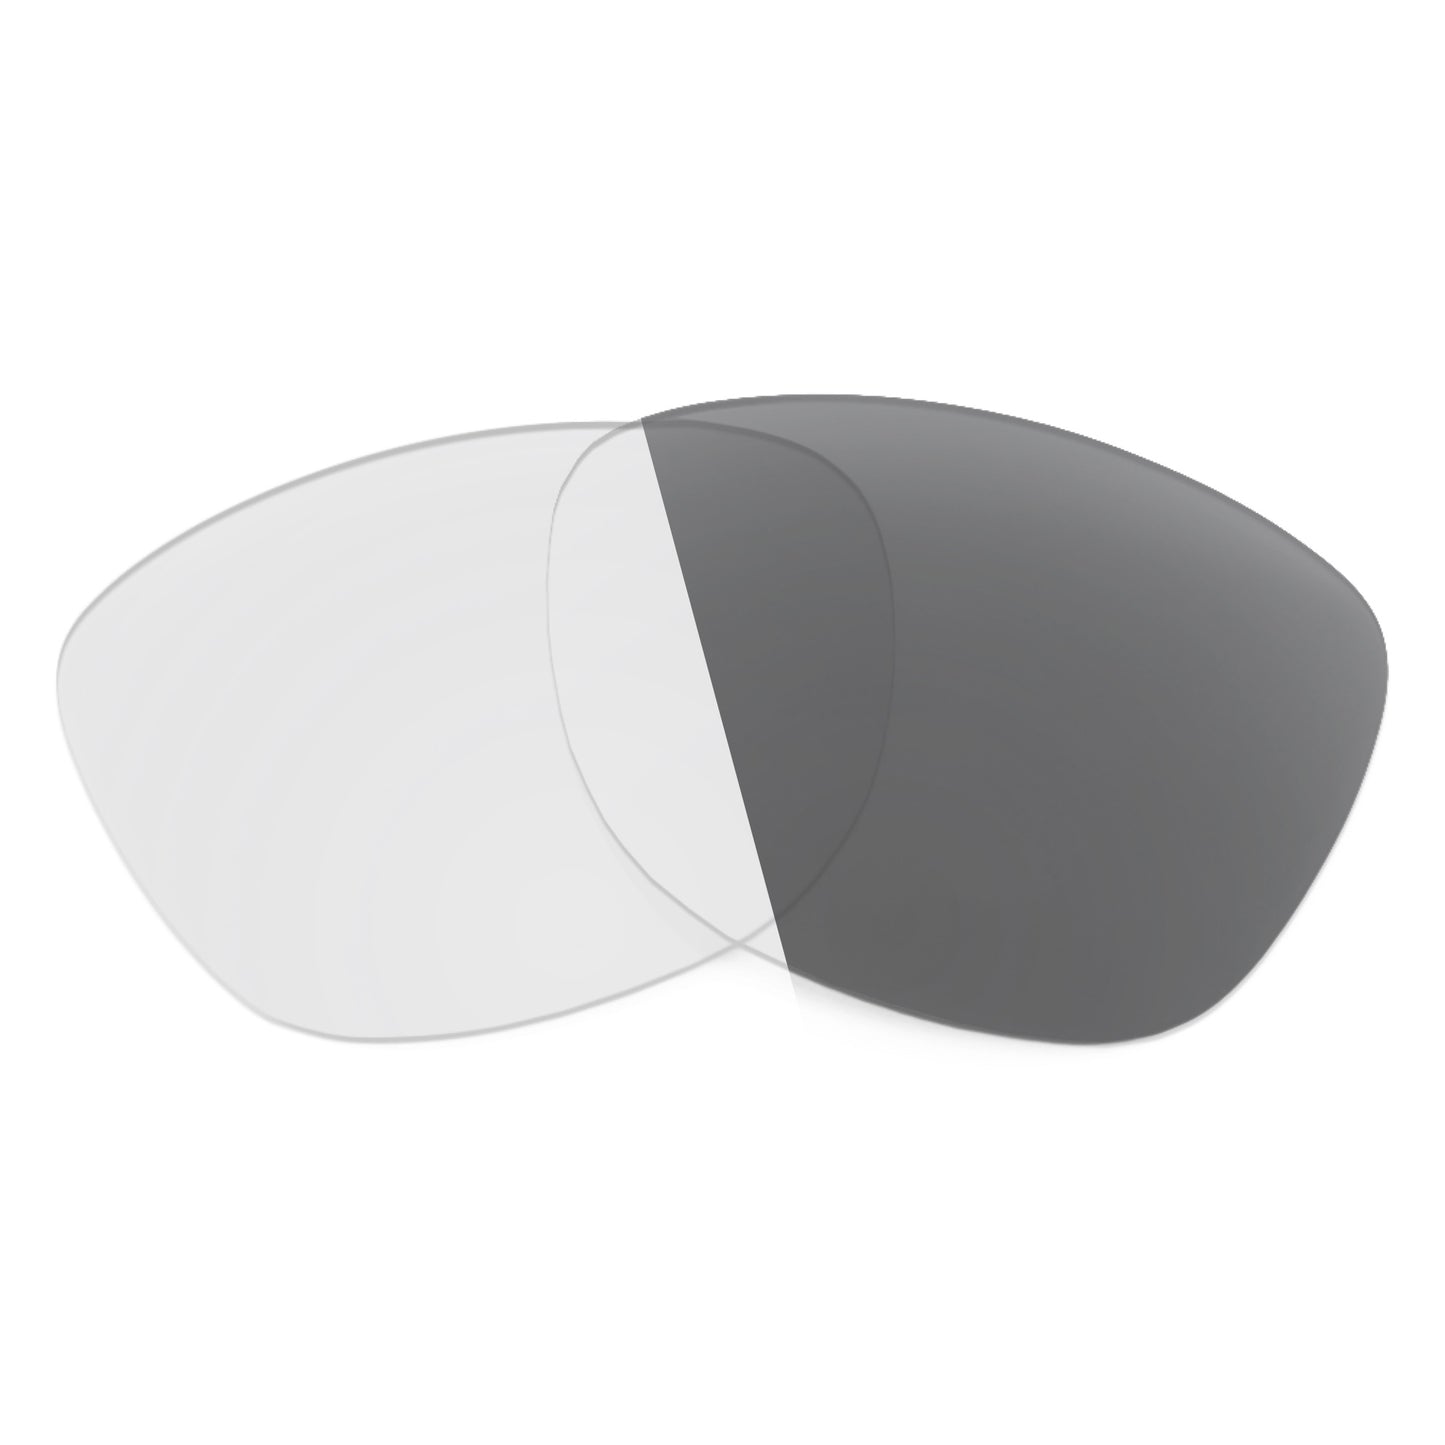 Revant replacement lenses for Ray-Ban RB4184 54mm Non-Polarized Adapt Gray Photochromic